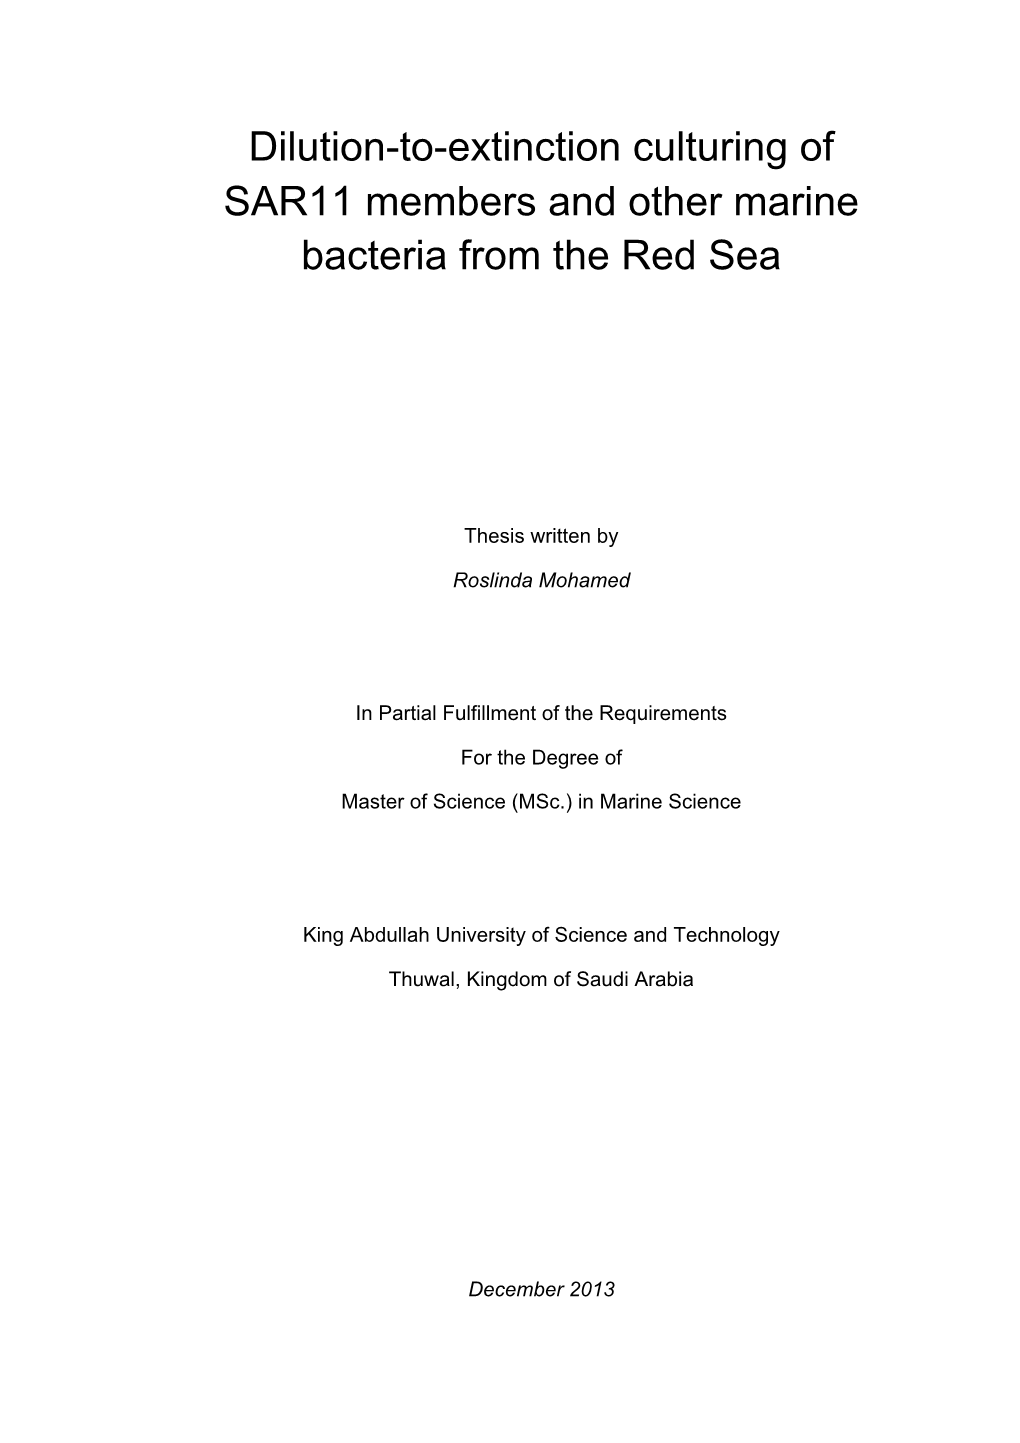 Dilution-To-Extinction Culturing of SAR11 Members and Other Marine Bacteria from the Red Sea